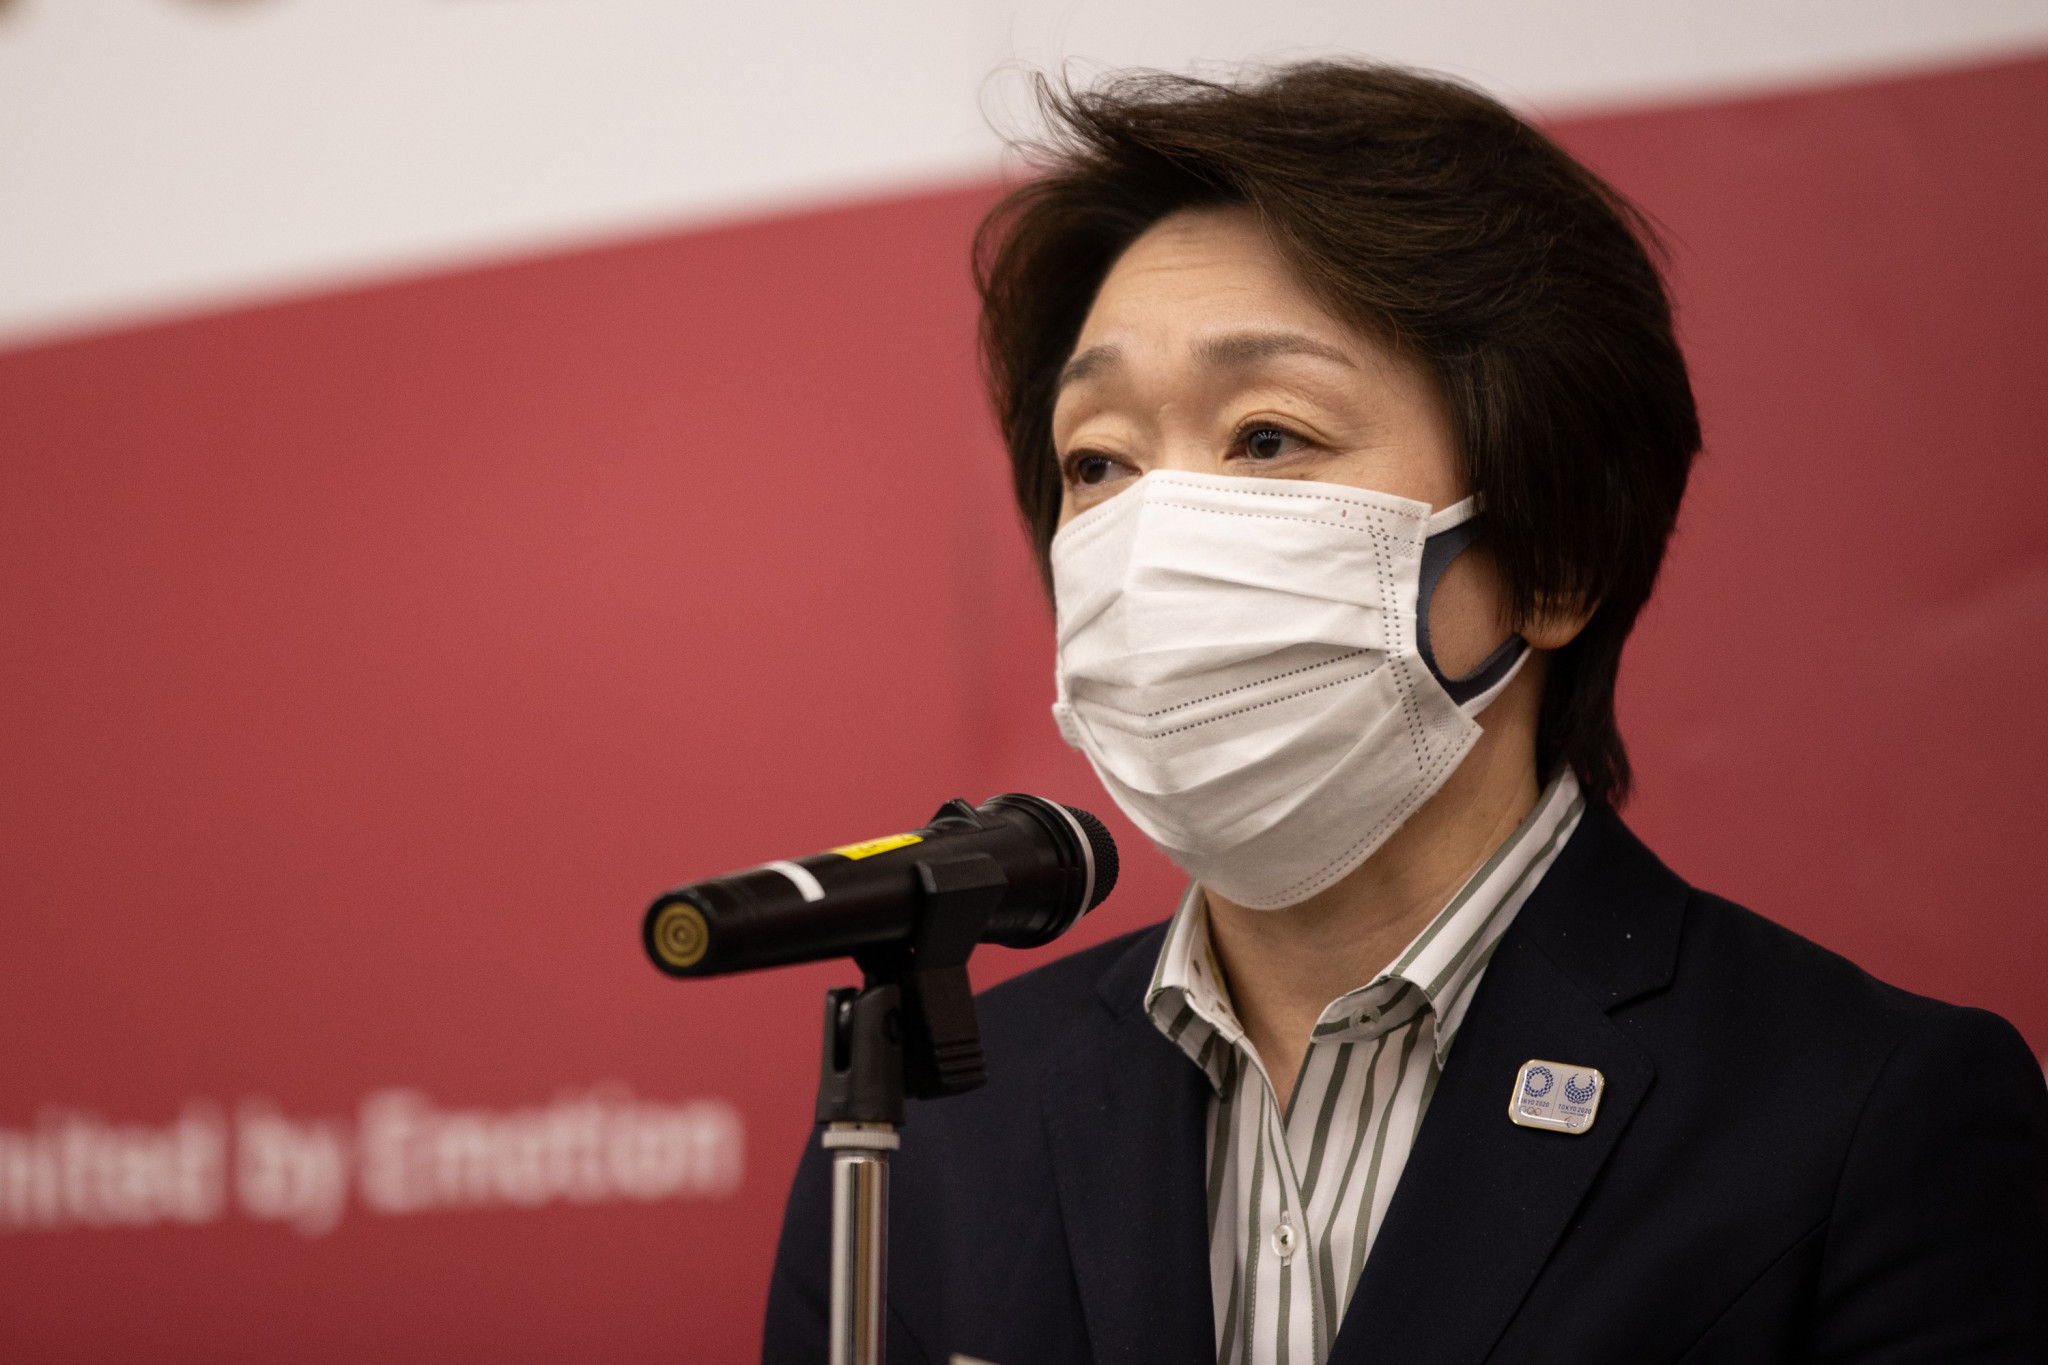 New Tokyo 2020 President Seiko Hashimoto addressed the International Olympic Committee Executive Board for the first time today ©Getty Images